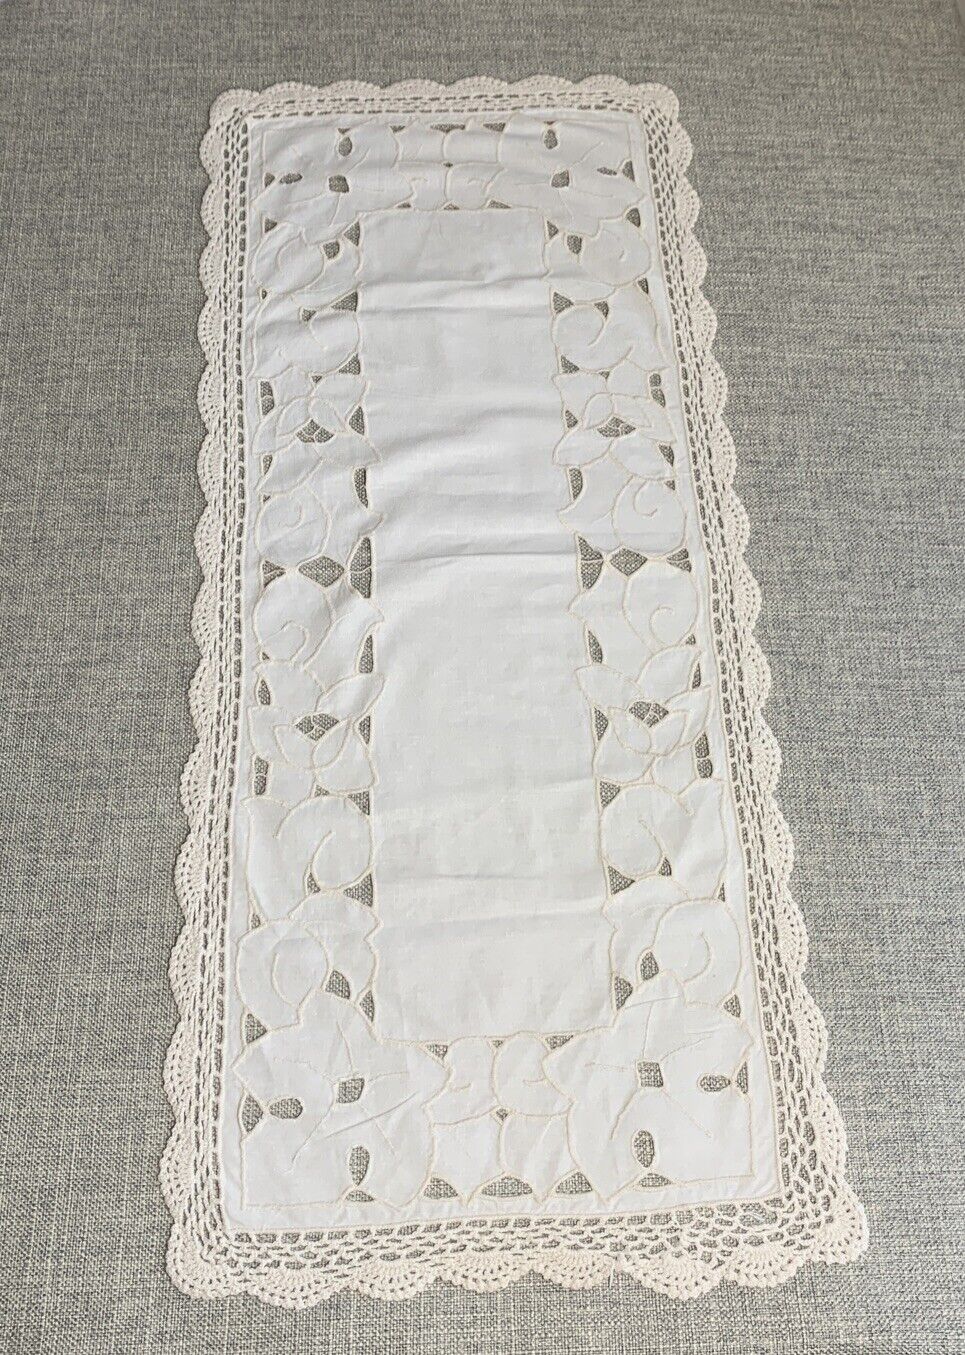 VINTAGE Cotton Ivory Cut Out Crochet Lace Embroidery Table Runner 32” x 14”